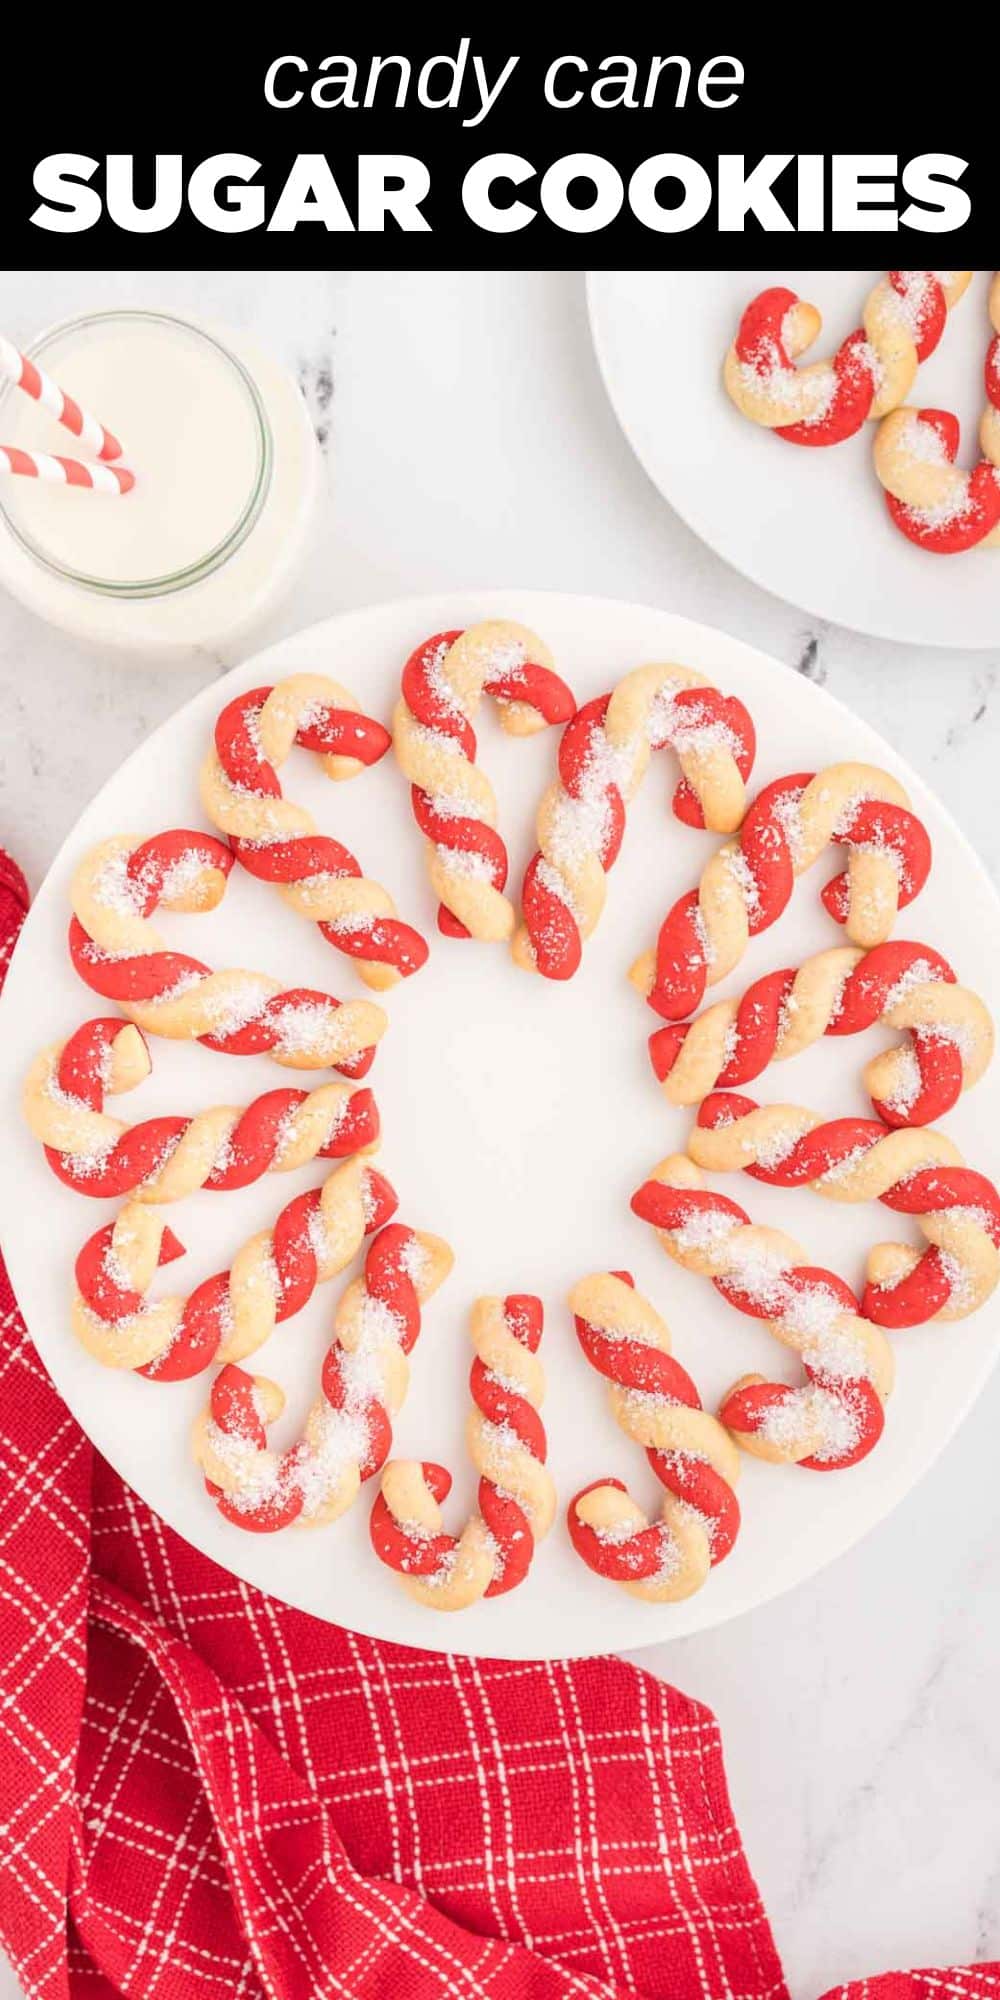 These delicious Peppermint Candy Cane Cookies start with a buttery sugar cookie dough flavored with a subtle hint of peppermint. Swirled and shaped like festive red and white canes, they’ll make the perfect addition to your holiday season.